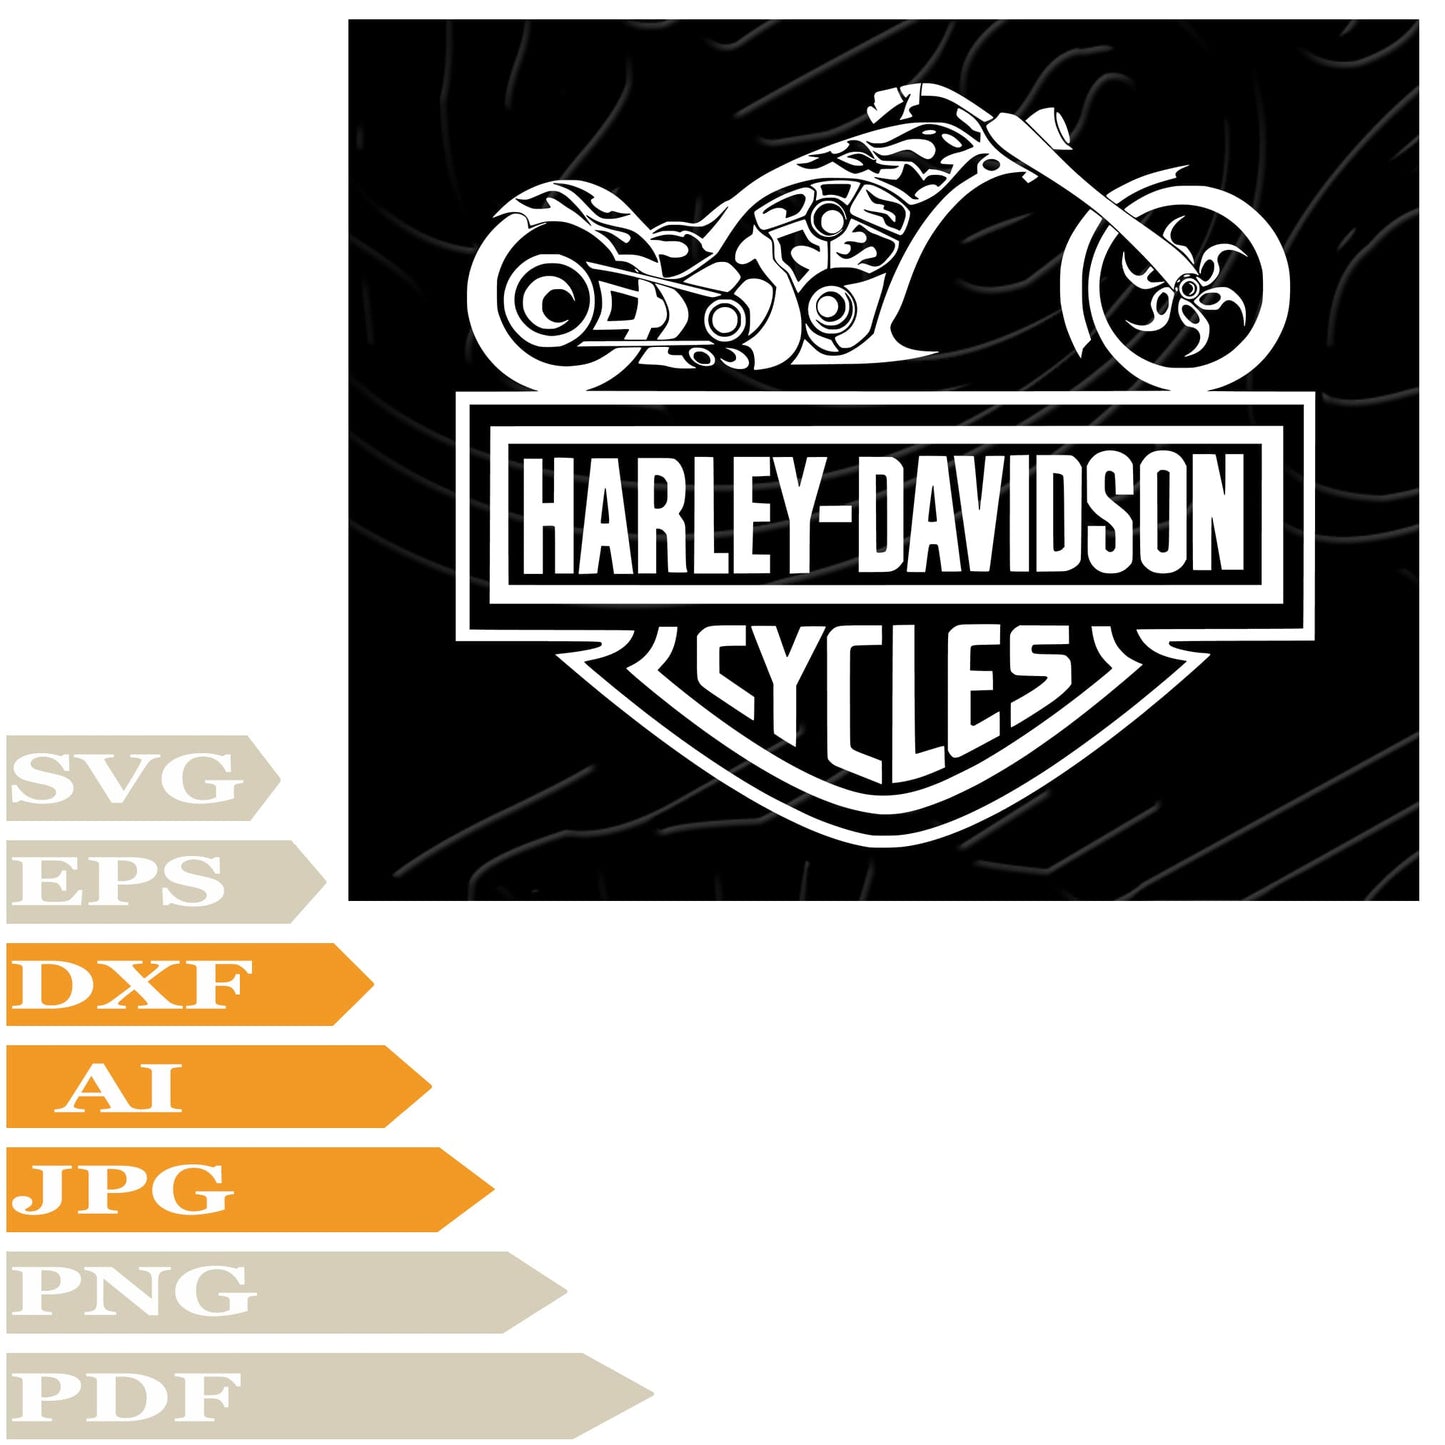 Sofvintage-Motorcycles SVG File,Motorcycles Harley Davidson Logo SVG Design,Harley Davidson Logo SVG Drawing,Motorcycles Harley Davidson Logo PNG,Harley Davidson Logo Vector Graphics,Harley Davidson Logo For Cricut,Motorcycles Harley Davidson Clip art,Harley Davidson Logo Image Cut,Motorcycles Harley Davidson T-Shirt,Motorcycles Wall Sticker,Motorcycles Harley Davidson Tattoo,Motorcycles Silhouette